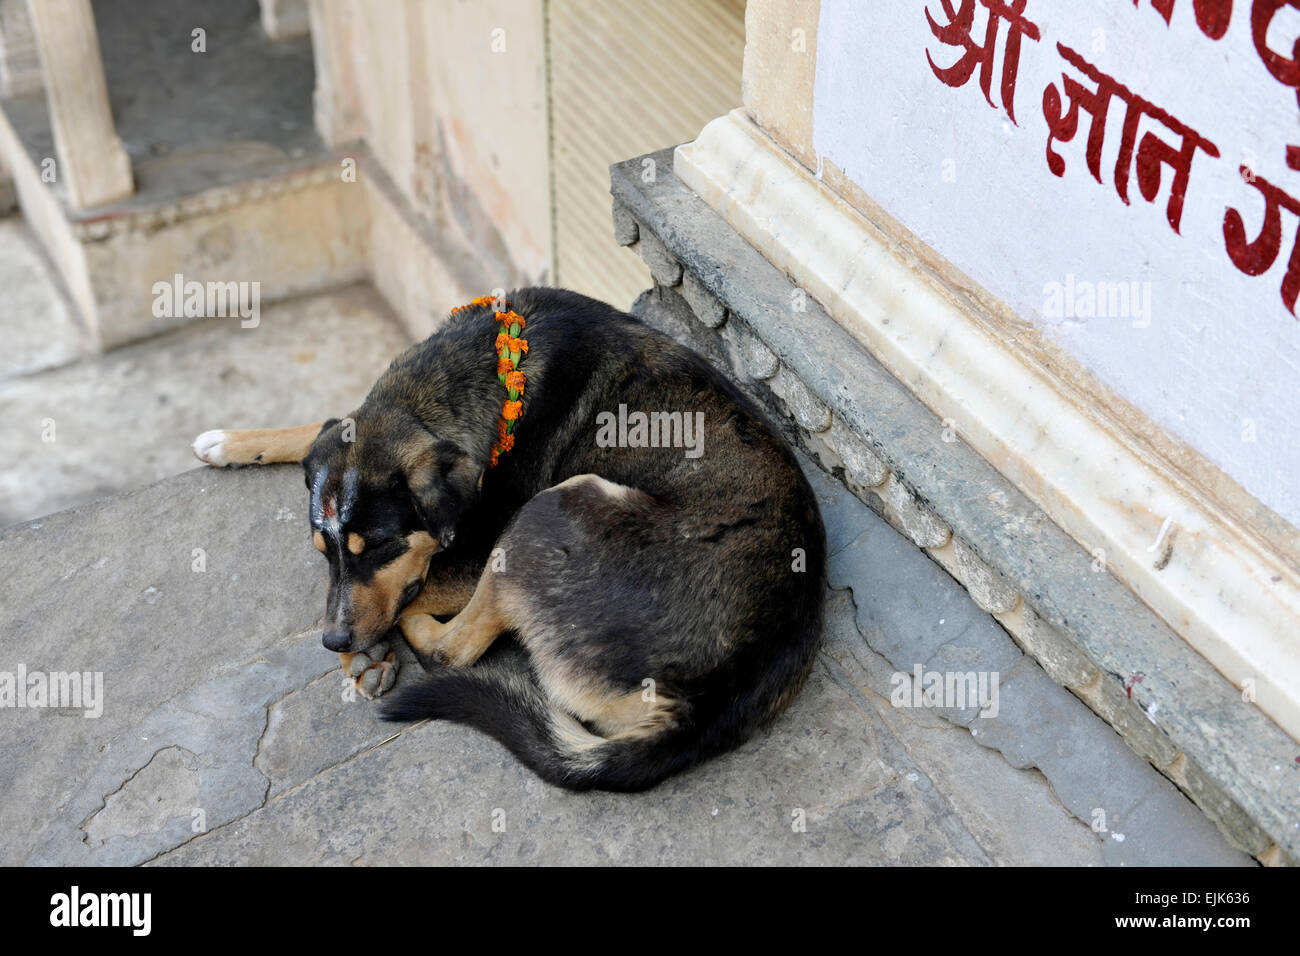 Dog sleeping in the Monkey Temple (Galwar Bagh), Jaipur India Stock Photo